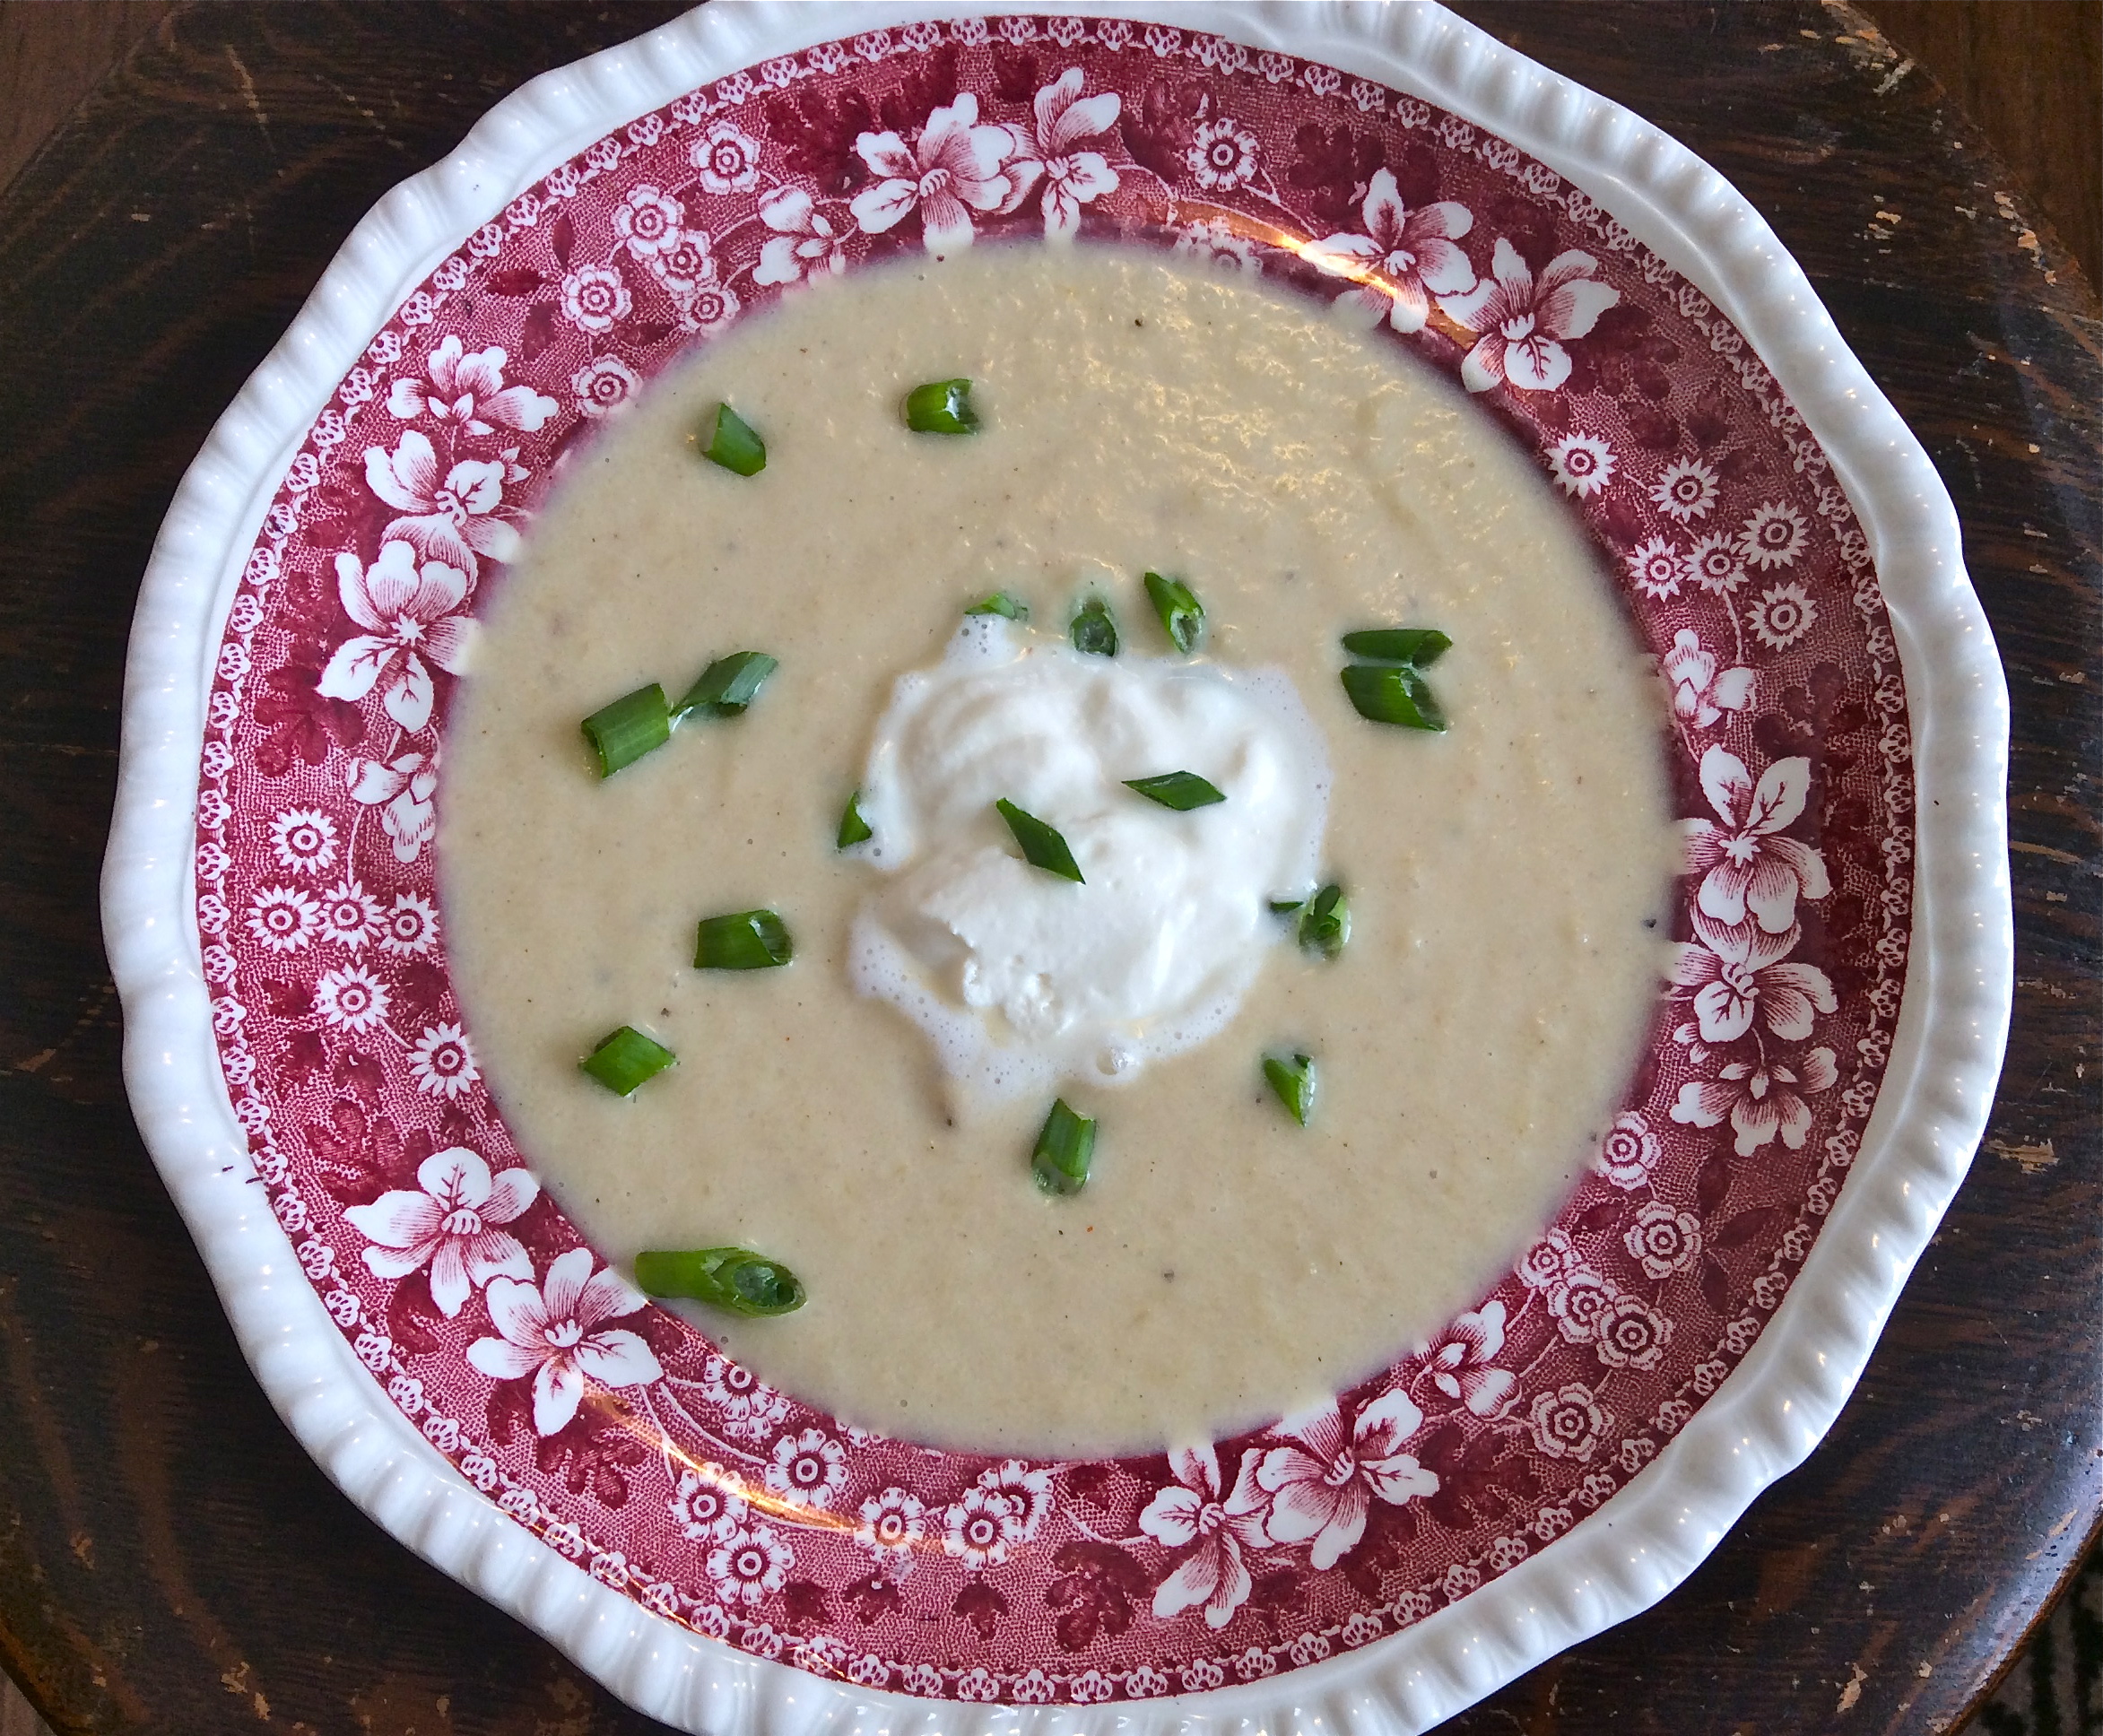 Parsnip and Ginger Soup